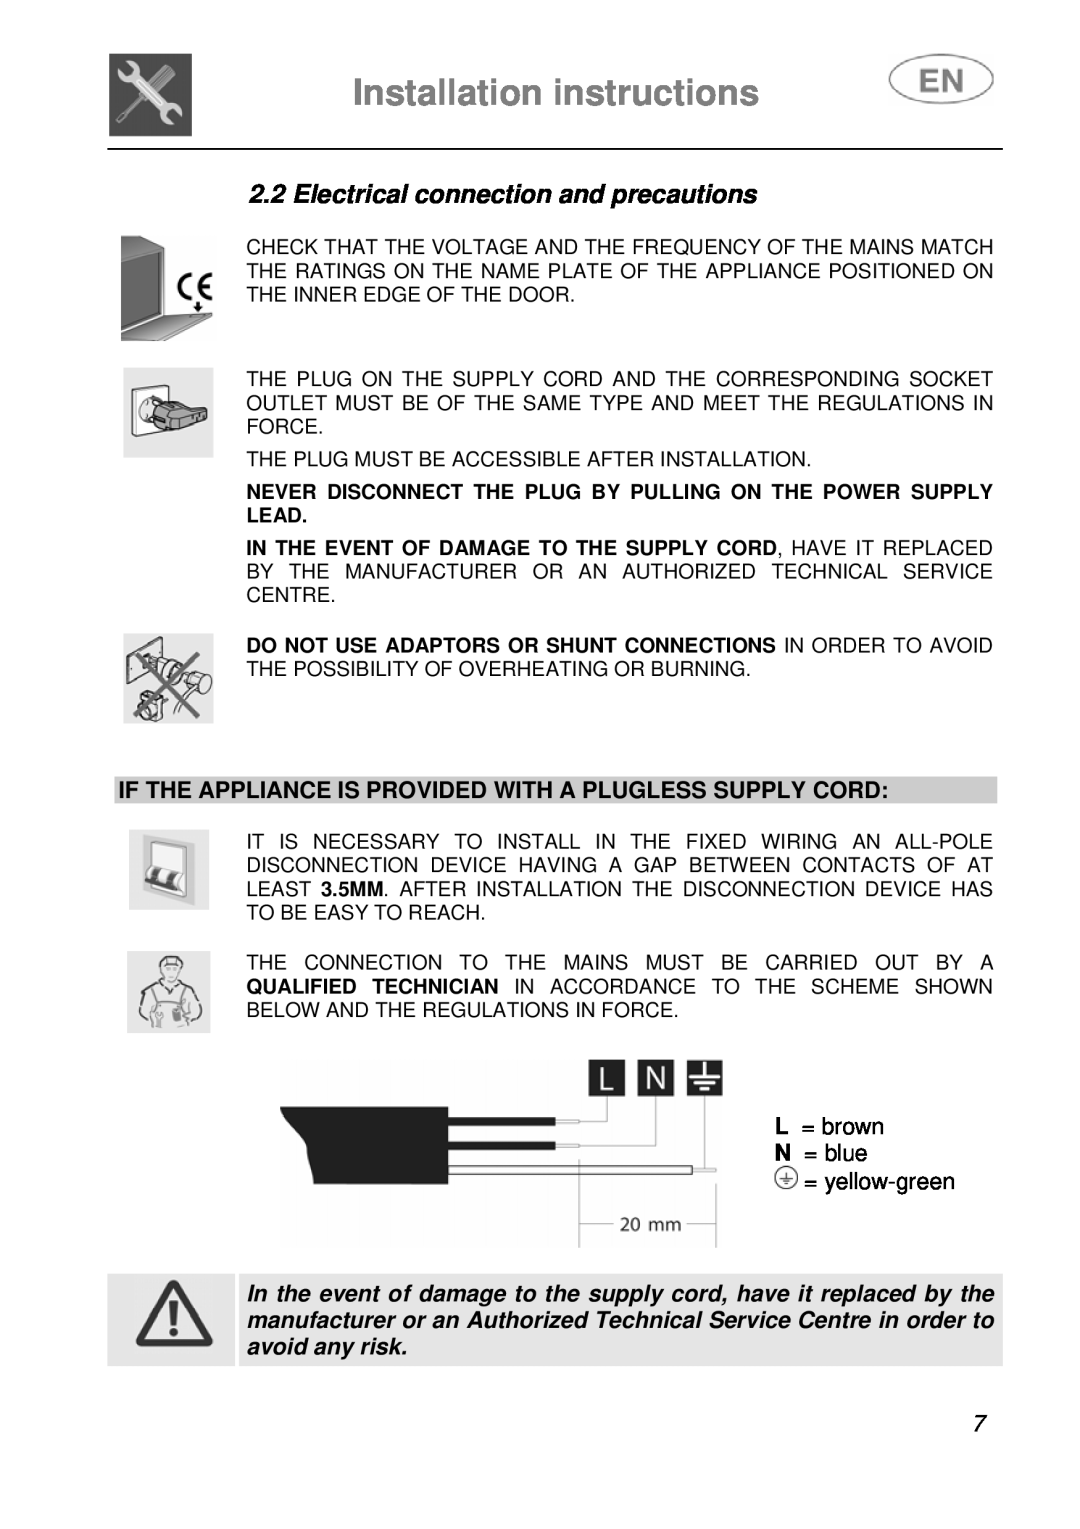 Smeg LSA14X7 instruction manual Installation instructions, Electrical connection and precautions 